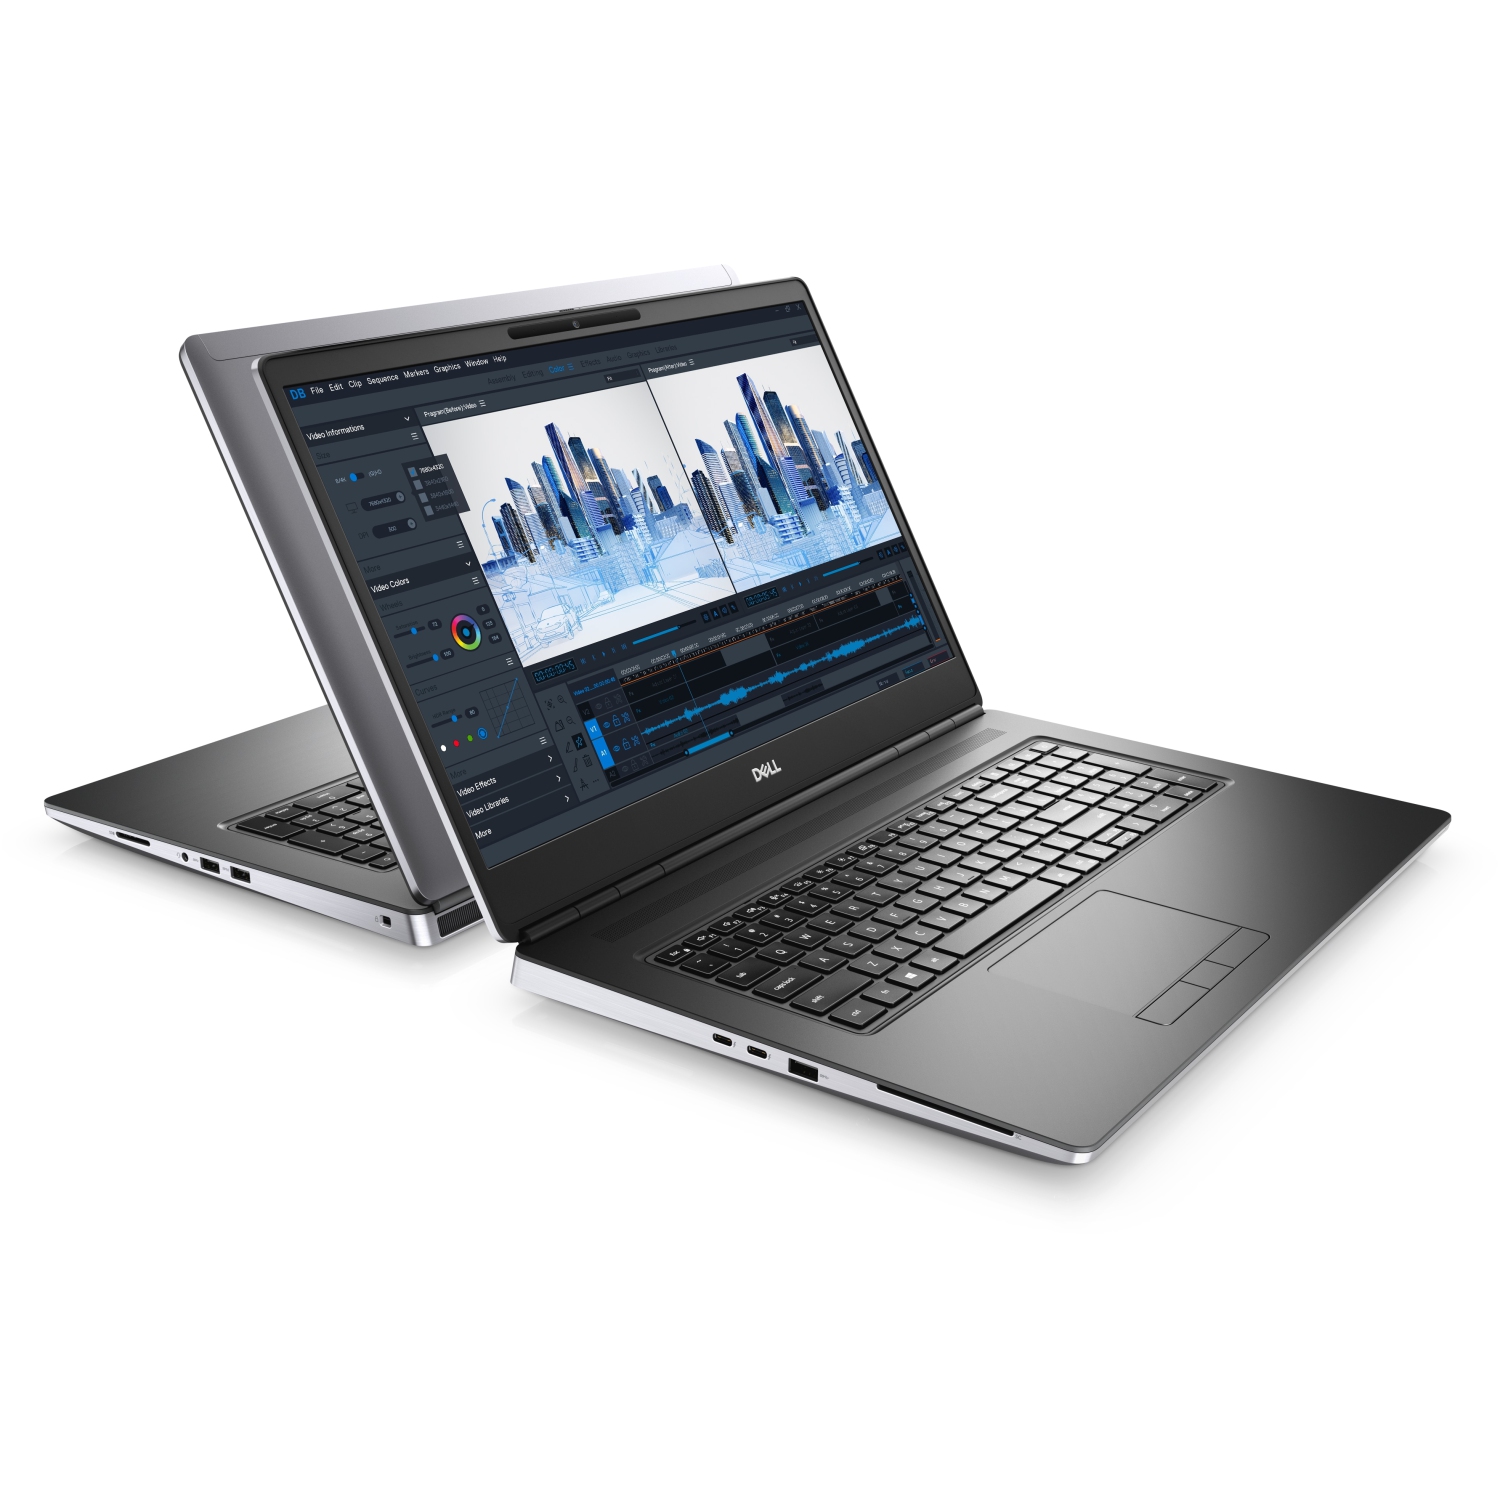 Refurbished (Excellent) – Dell Precision 7000 7760 Workstation Laptop (2021) | 17.3" FHD | Core i7 - 512GB SSD - 32GB RAM - RTX A4000 | 8 Cores @ 4.6 GHz - 11th Gen CPU - 8GB GDDR6